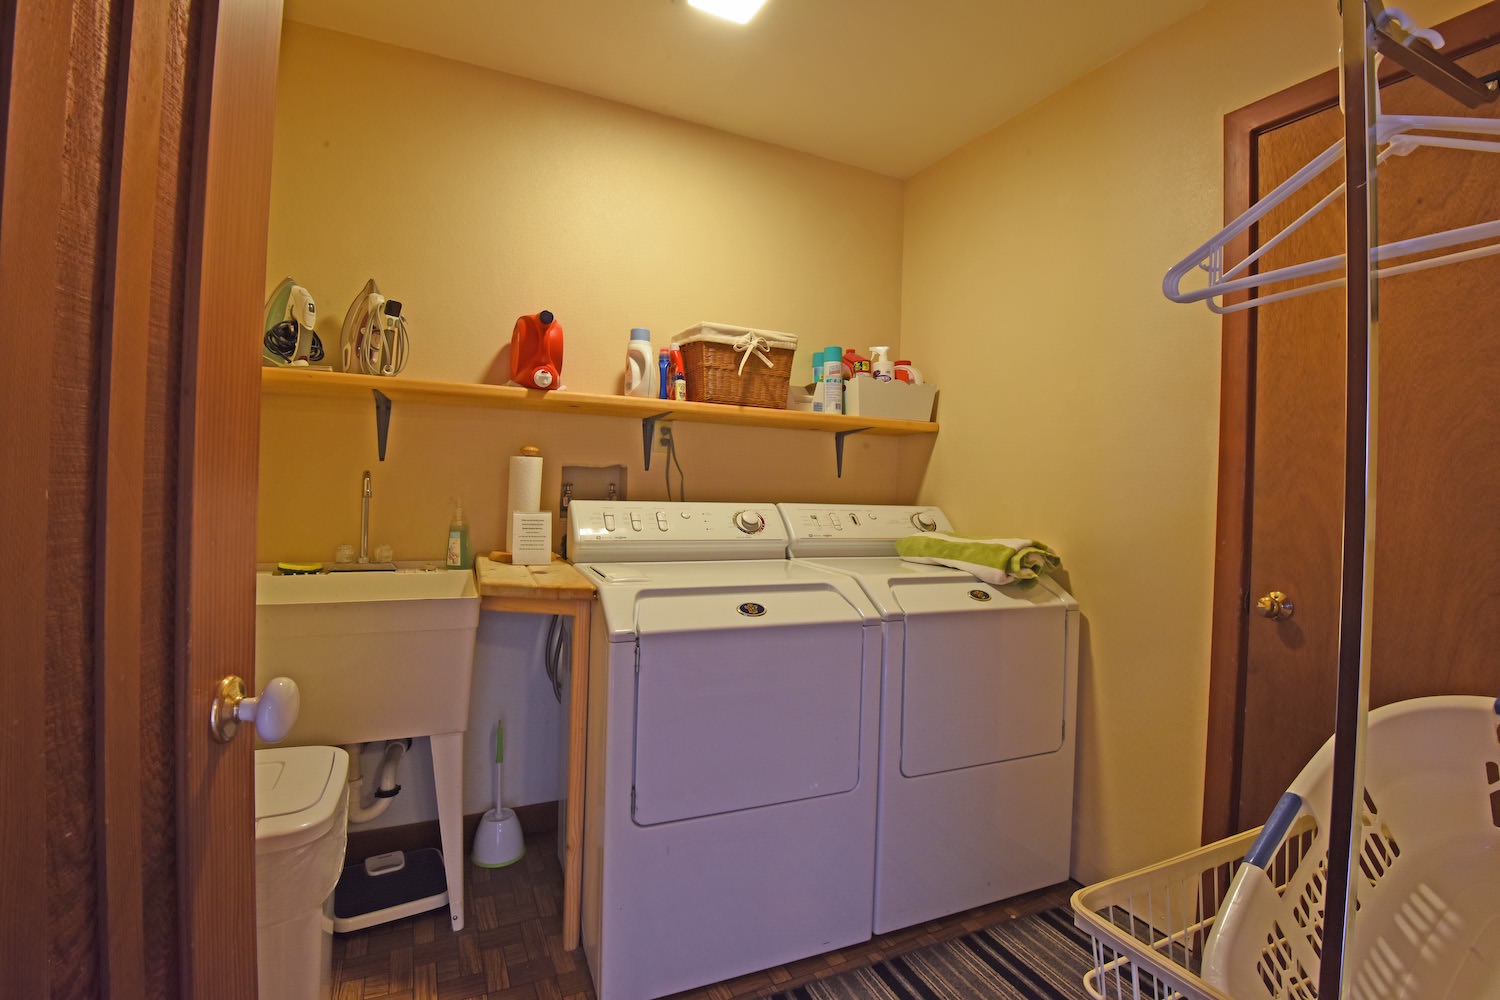 Private laundry room w/ washer and dryer